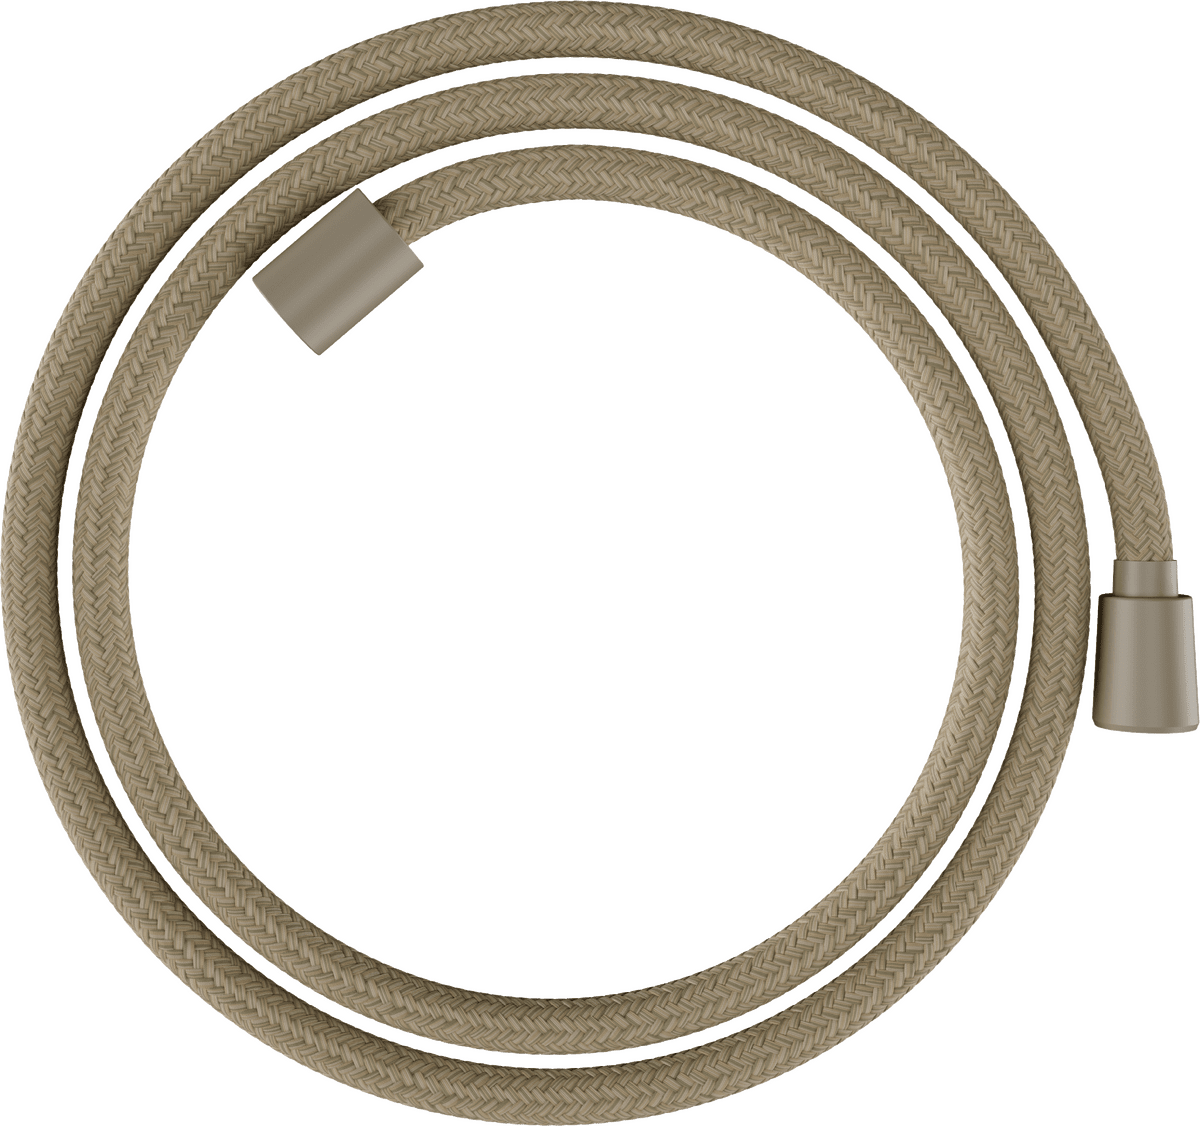 Picture of HANSGROHE Designflex Planet Edition Textile shower hose 160 cm #28250210 - Sand (recycled)